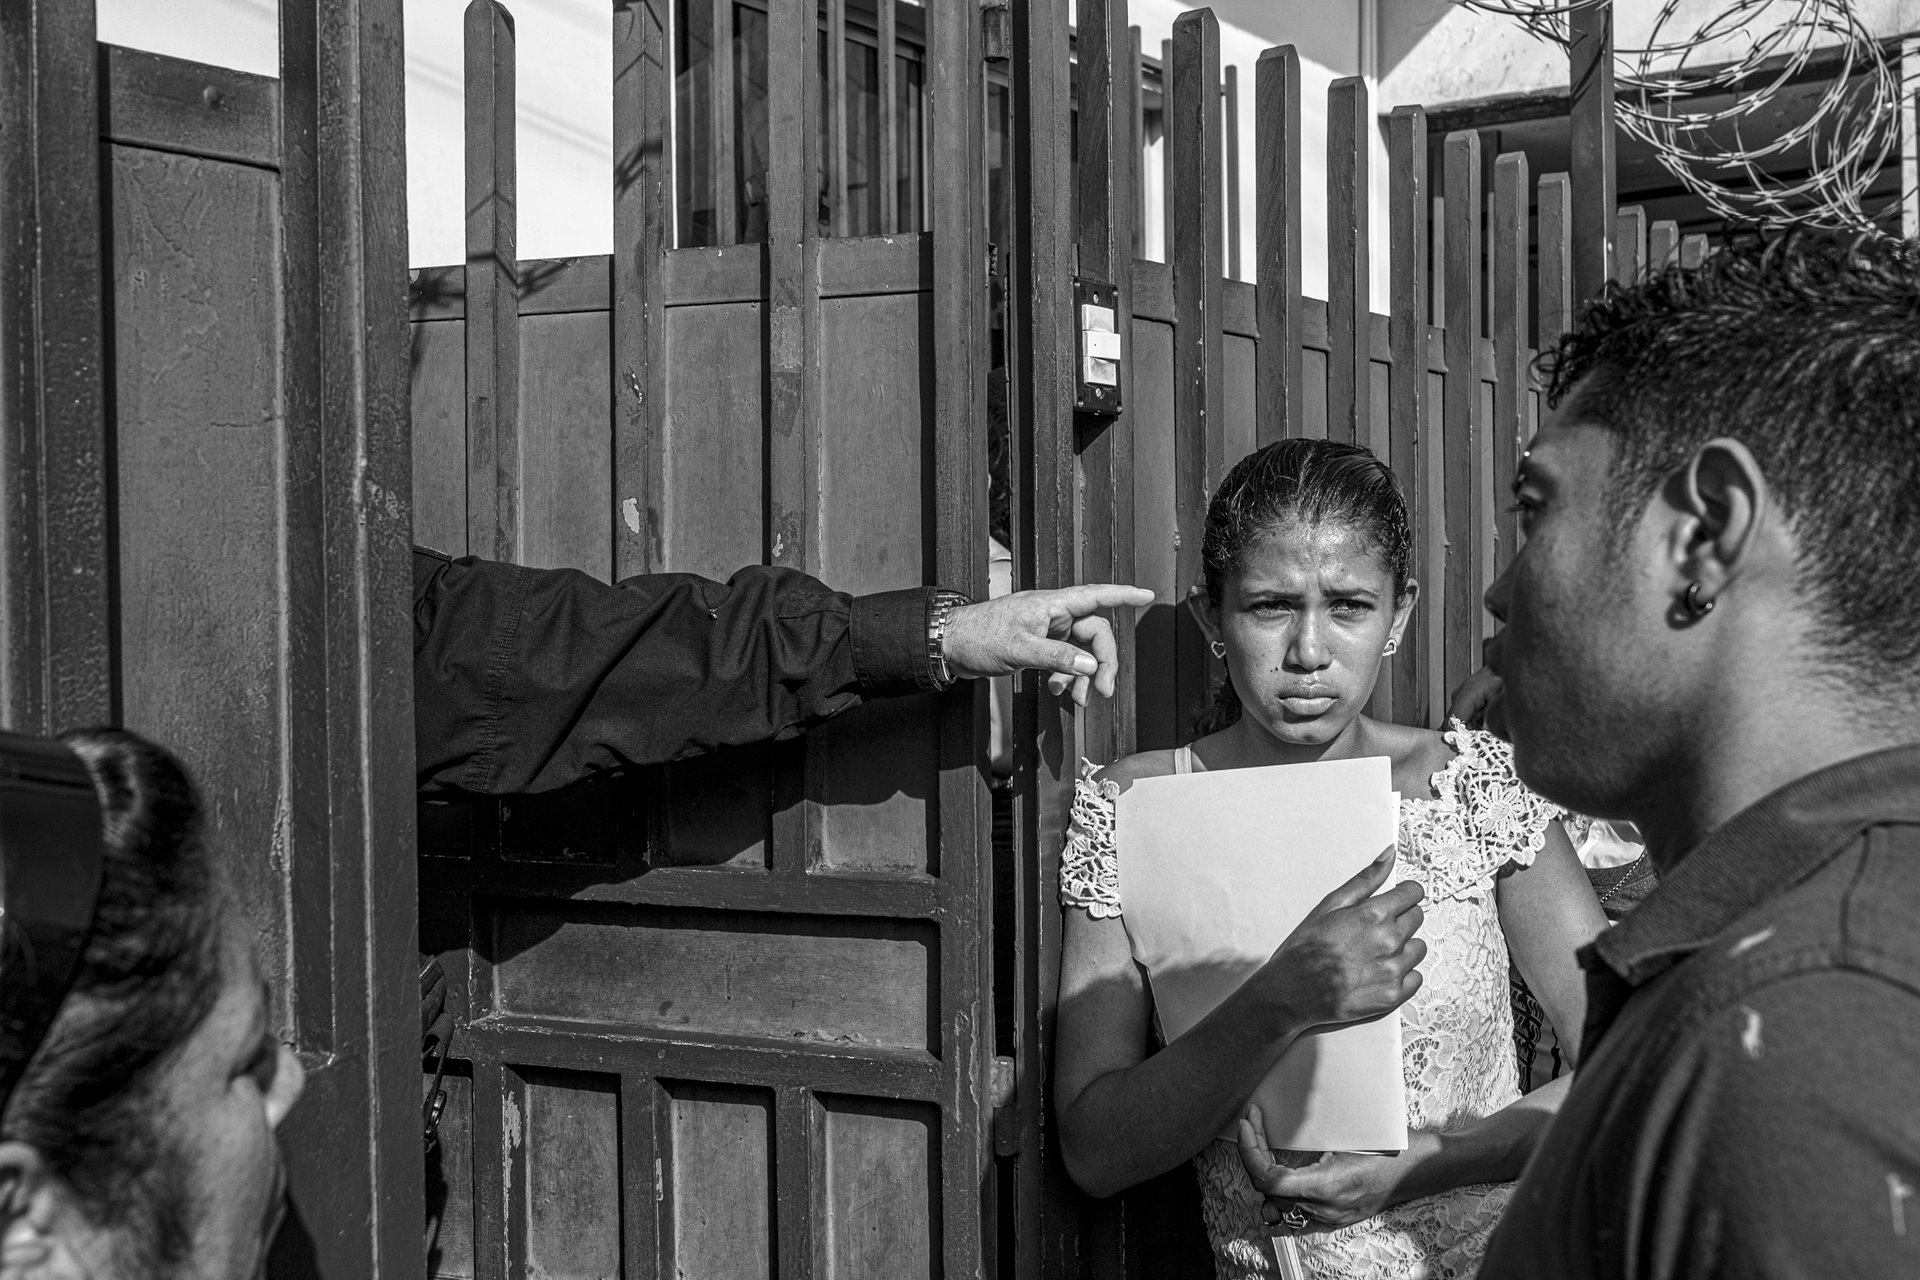 Asylum seekers wait at the gates of the Mexican Commission for Aid to Refugees (COMAR) for a hearing that will grant them a humanitarian visa to stay in Mexico or travel across the country to the United States. COMAR has been accused of corruption and stalling the approval of humanitarian visas. Tapachula, Mexico.